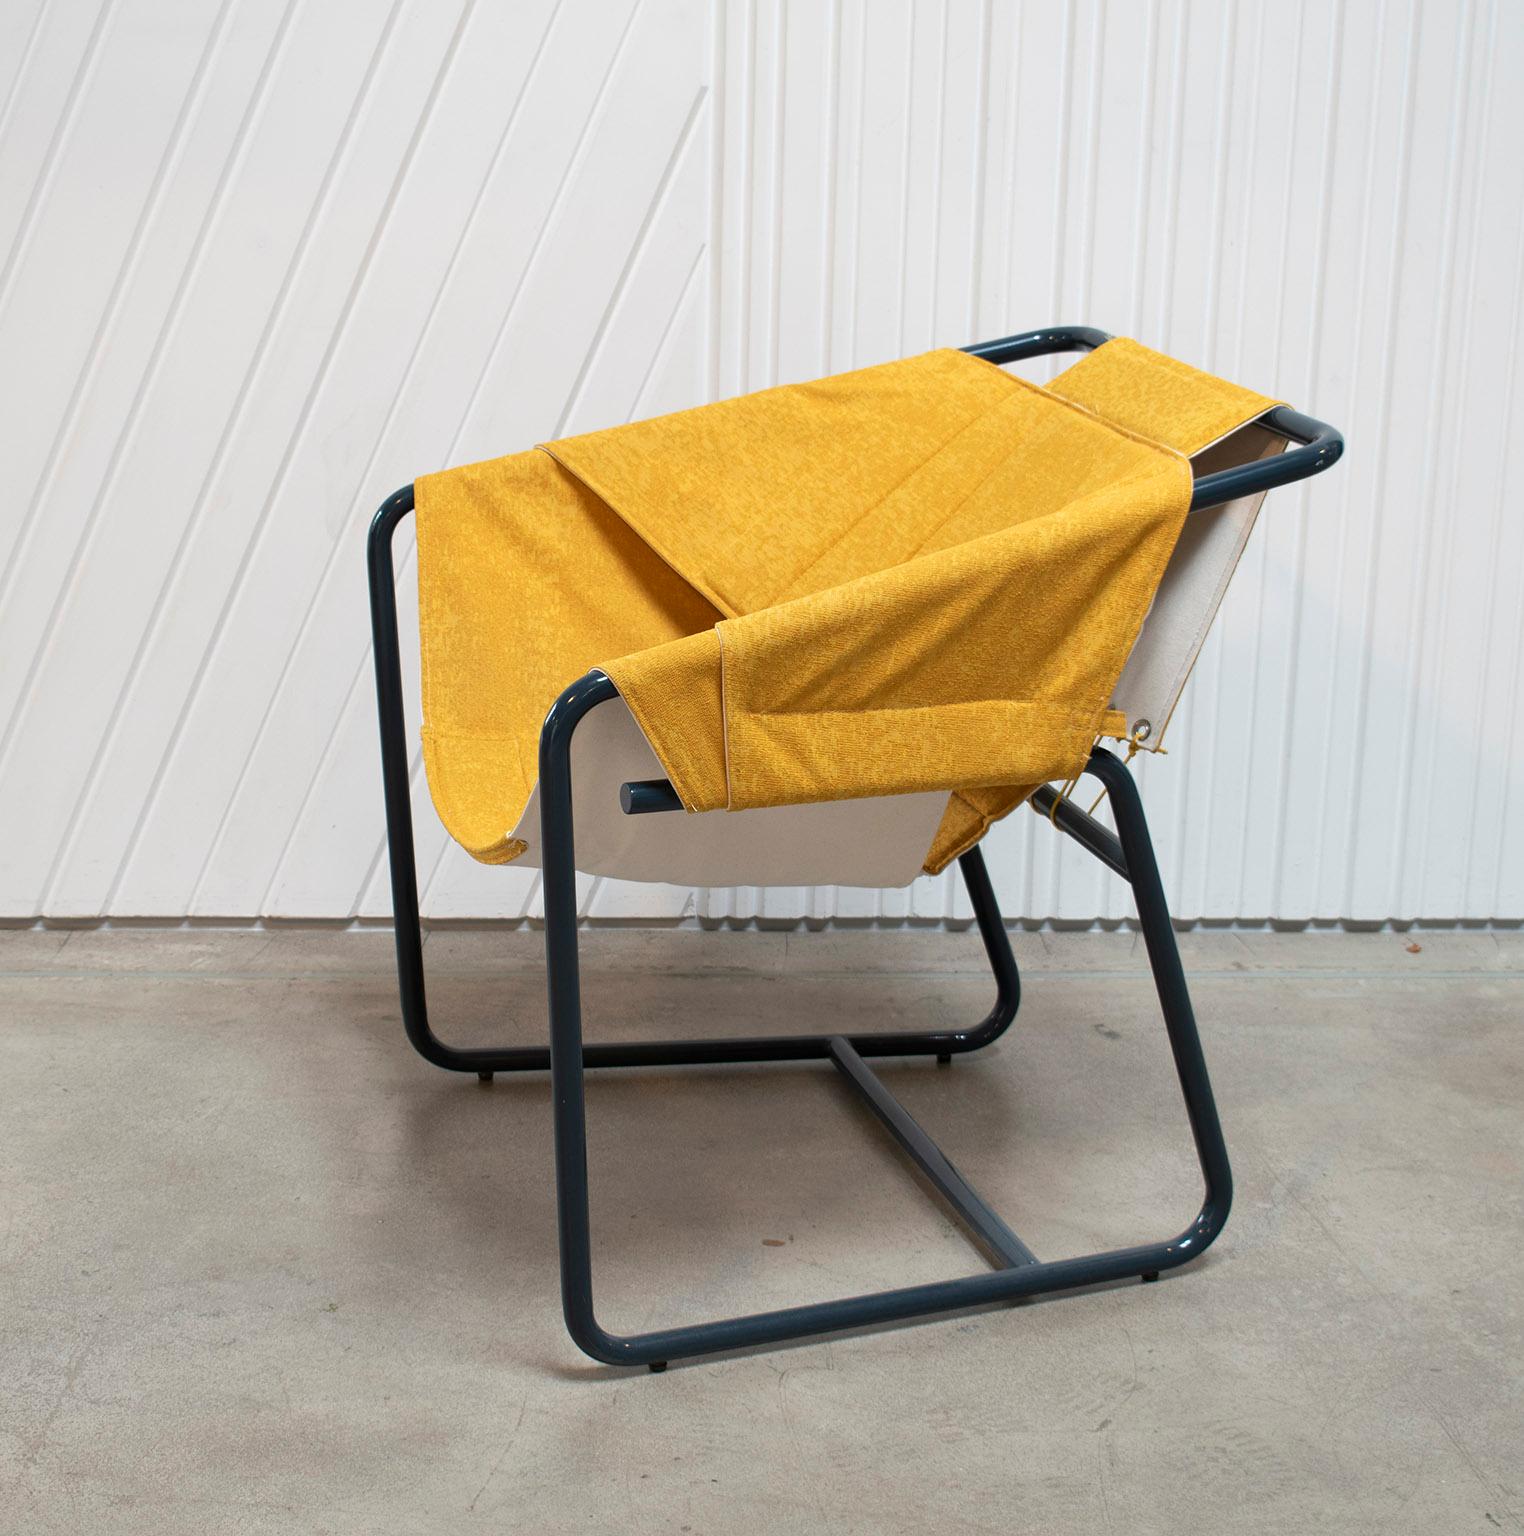 The easy chair combines the casual vibe of sling chairs with the cozy comfort of a classic club chair all in a floating form reminiscent of midcentury shell chairs. The top layer of the quilted sling is available in a choice of upholstery fabrics